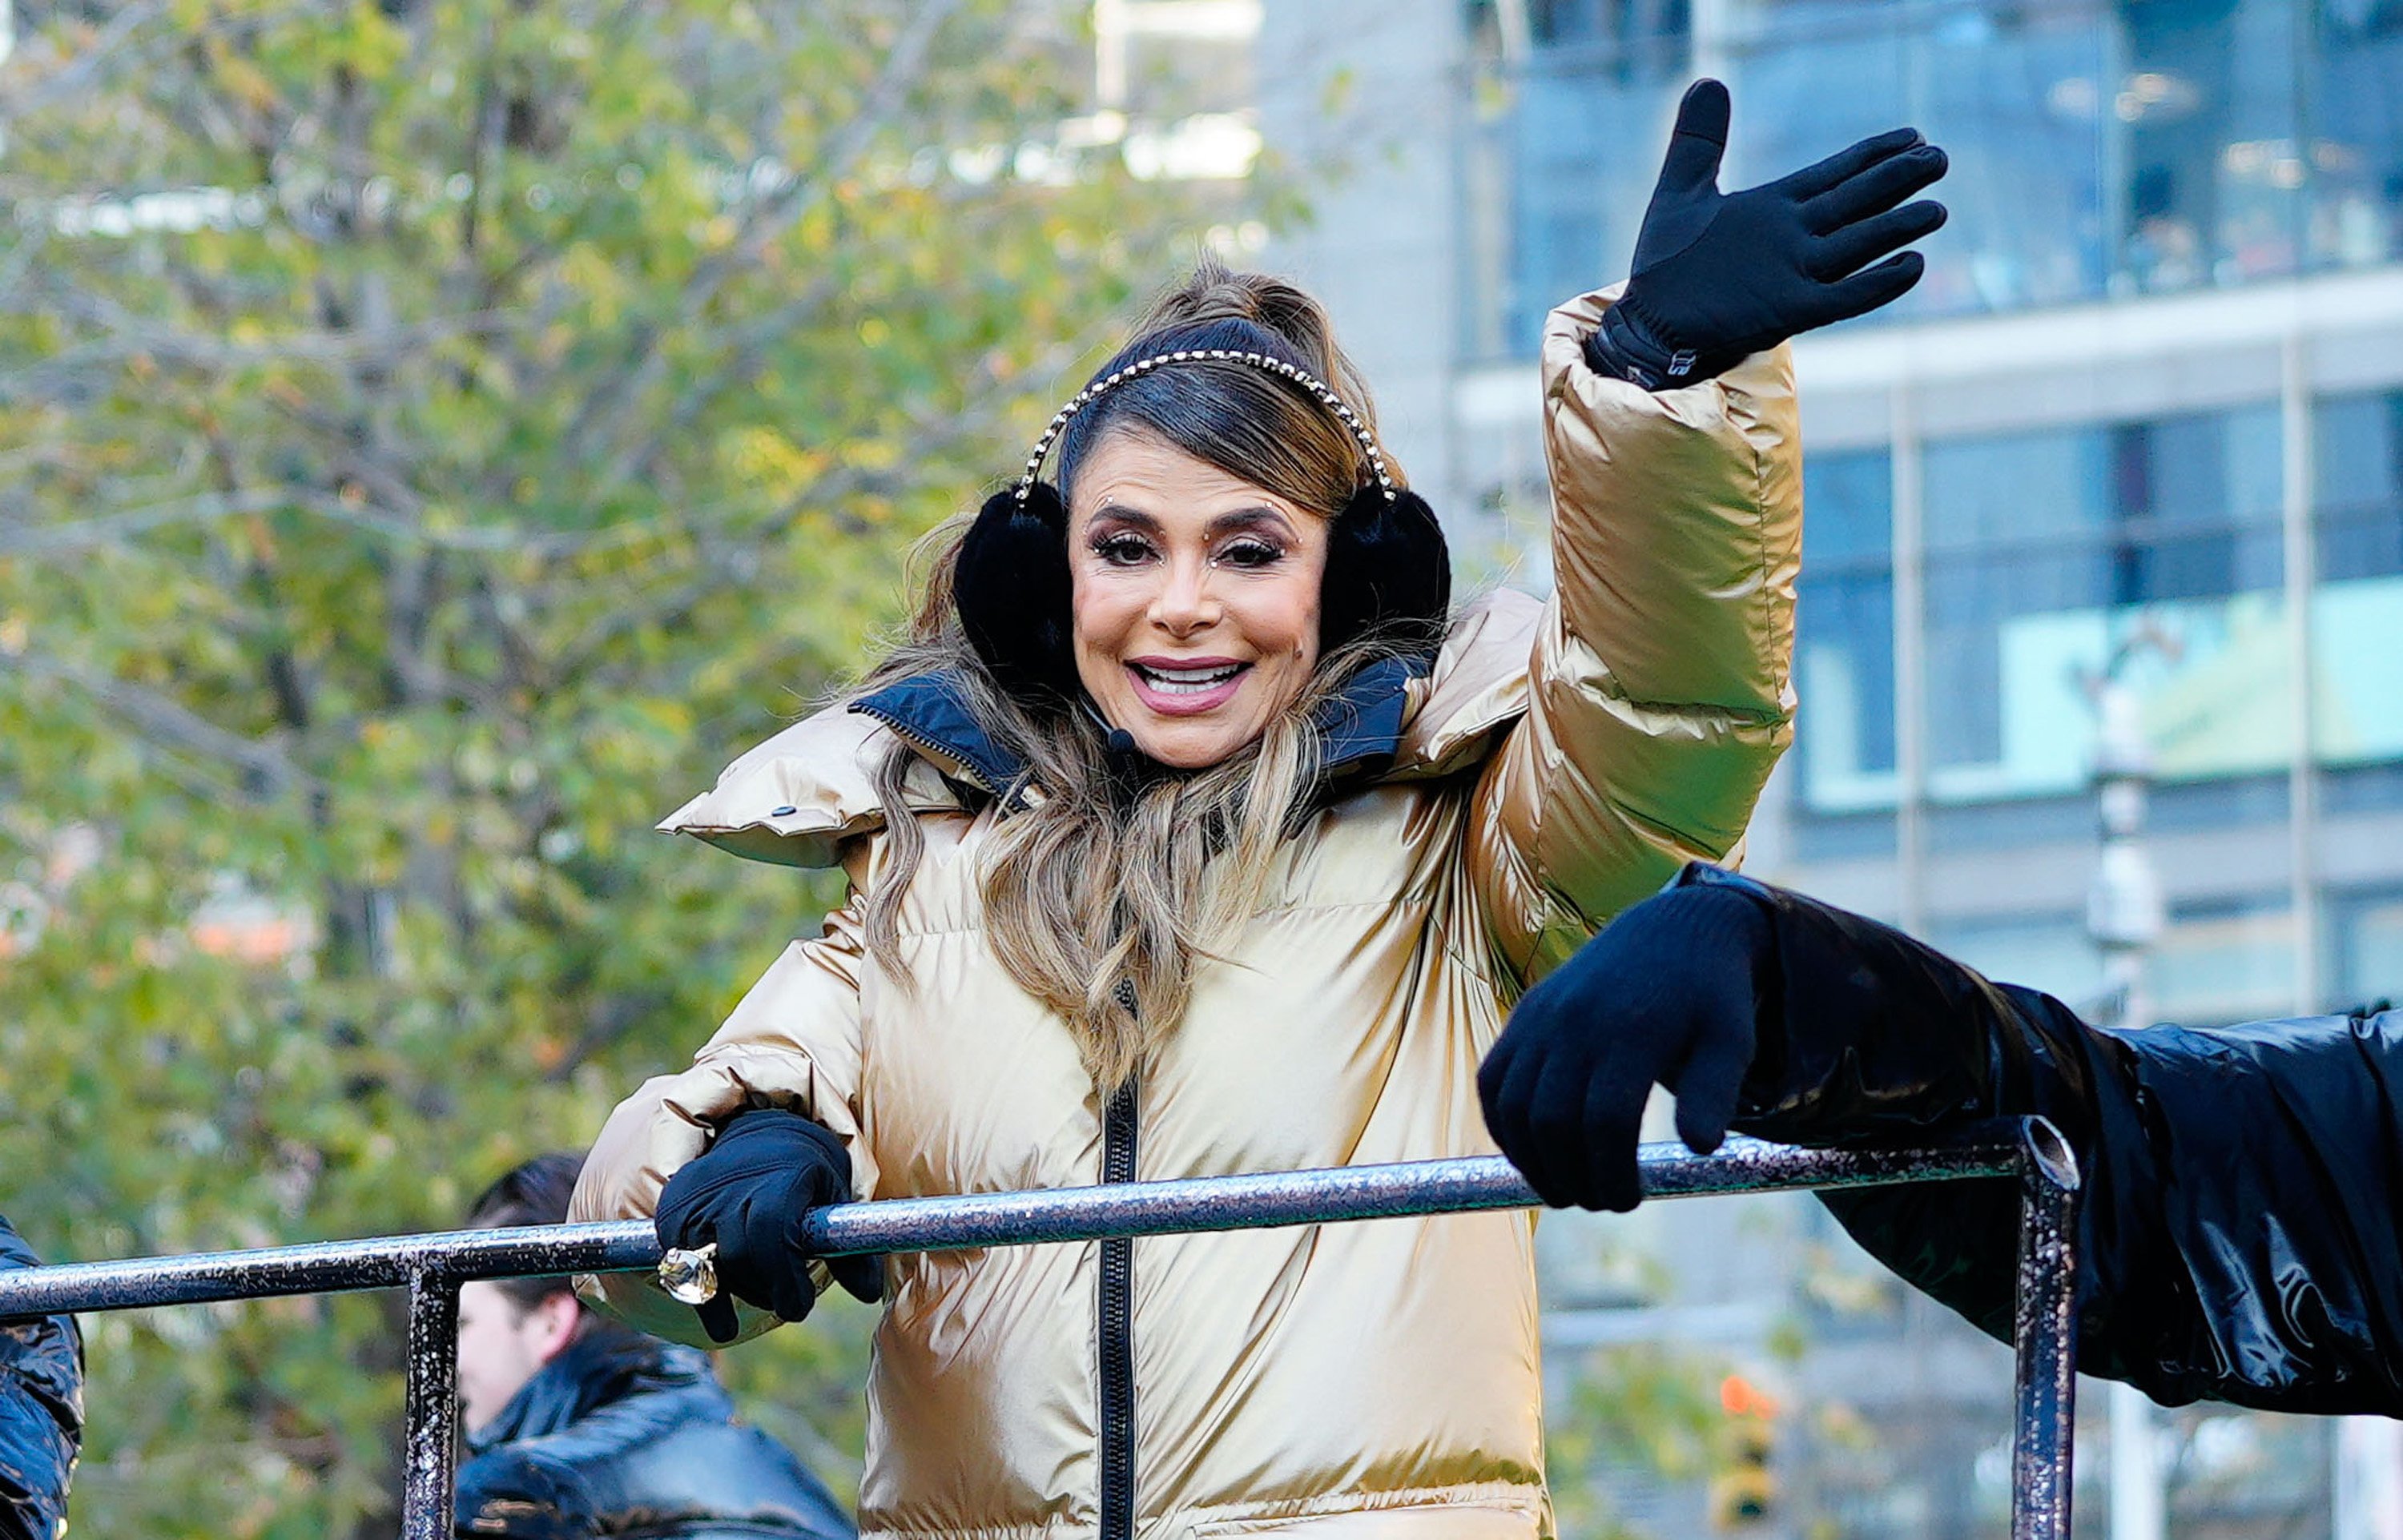 Paula Abdul at the Macy's Thanksgiving Day Parade in New York City, November 24, 2022. | Source: Getty Images